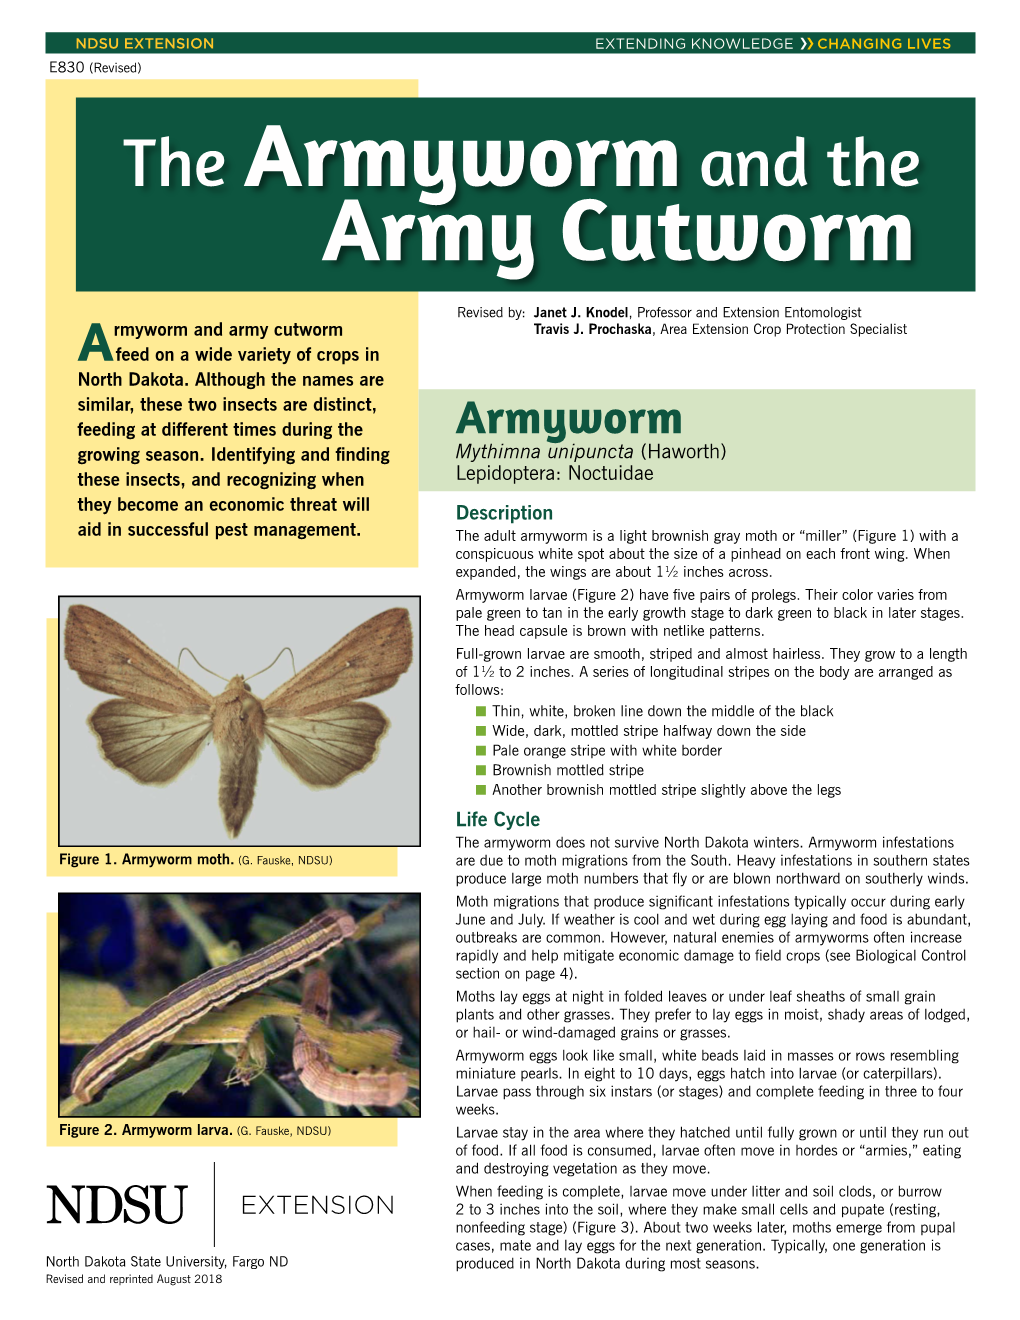 The Armyworm and the Army Cutworm